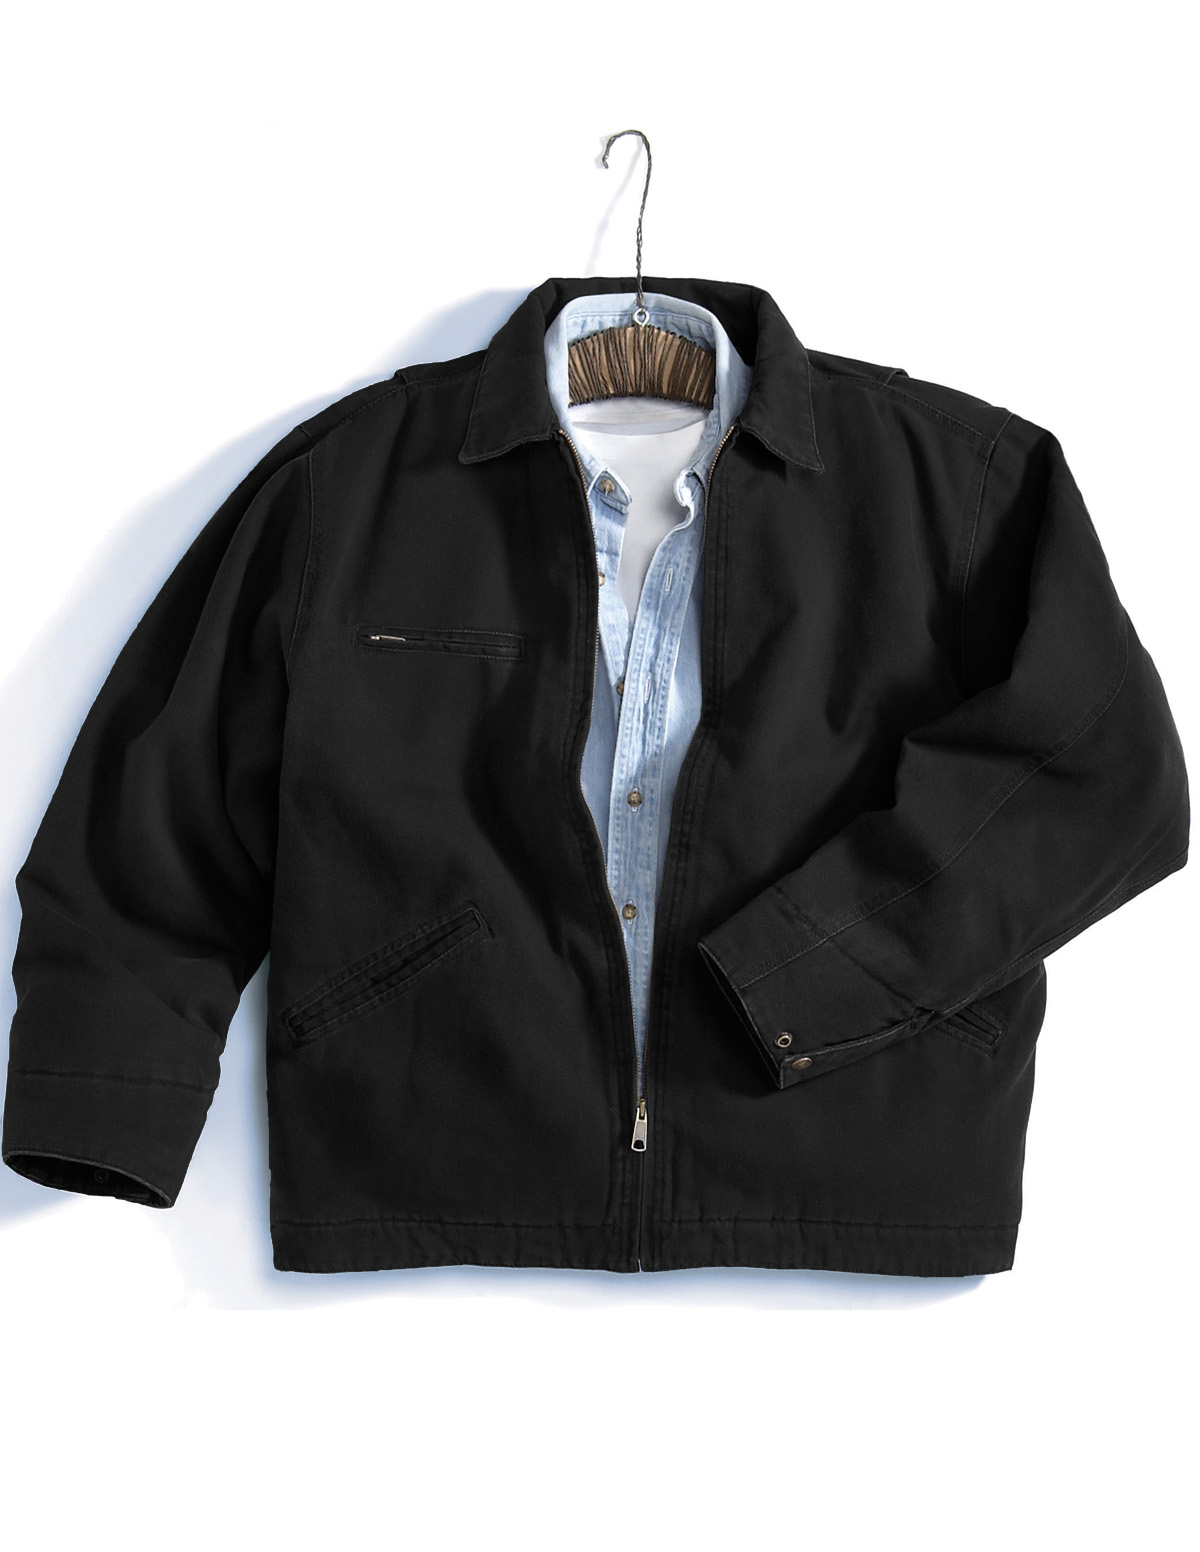 Tri-Mountain Workwear Jackets category from Tri-Mountain Apparel